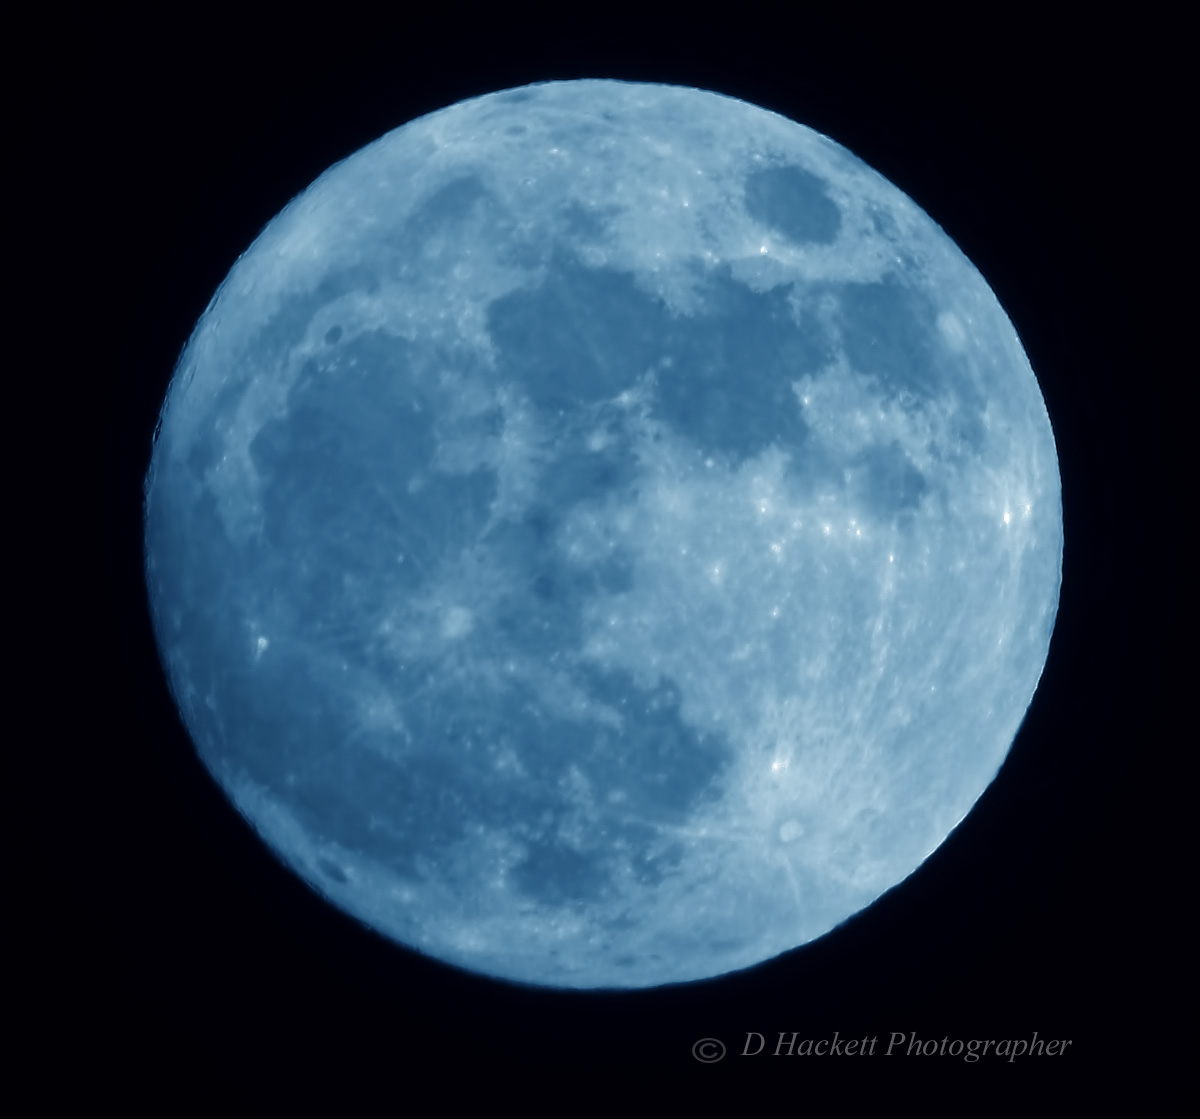 Blue Moon October 31, 2020, is a rare and unusual phenomenon. It is the second Full Moon of the month or the thirteenth Full Moon of the year. Secondly, the Blue Moon this year coincides with the international holiday – Halloween.  #moon #halloween  https://t.co/pwGi6FZKLo https://t.co/XXE0t54JaO